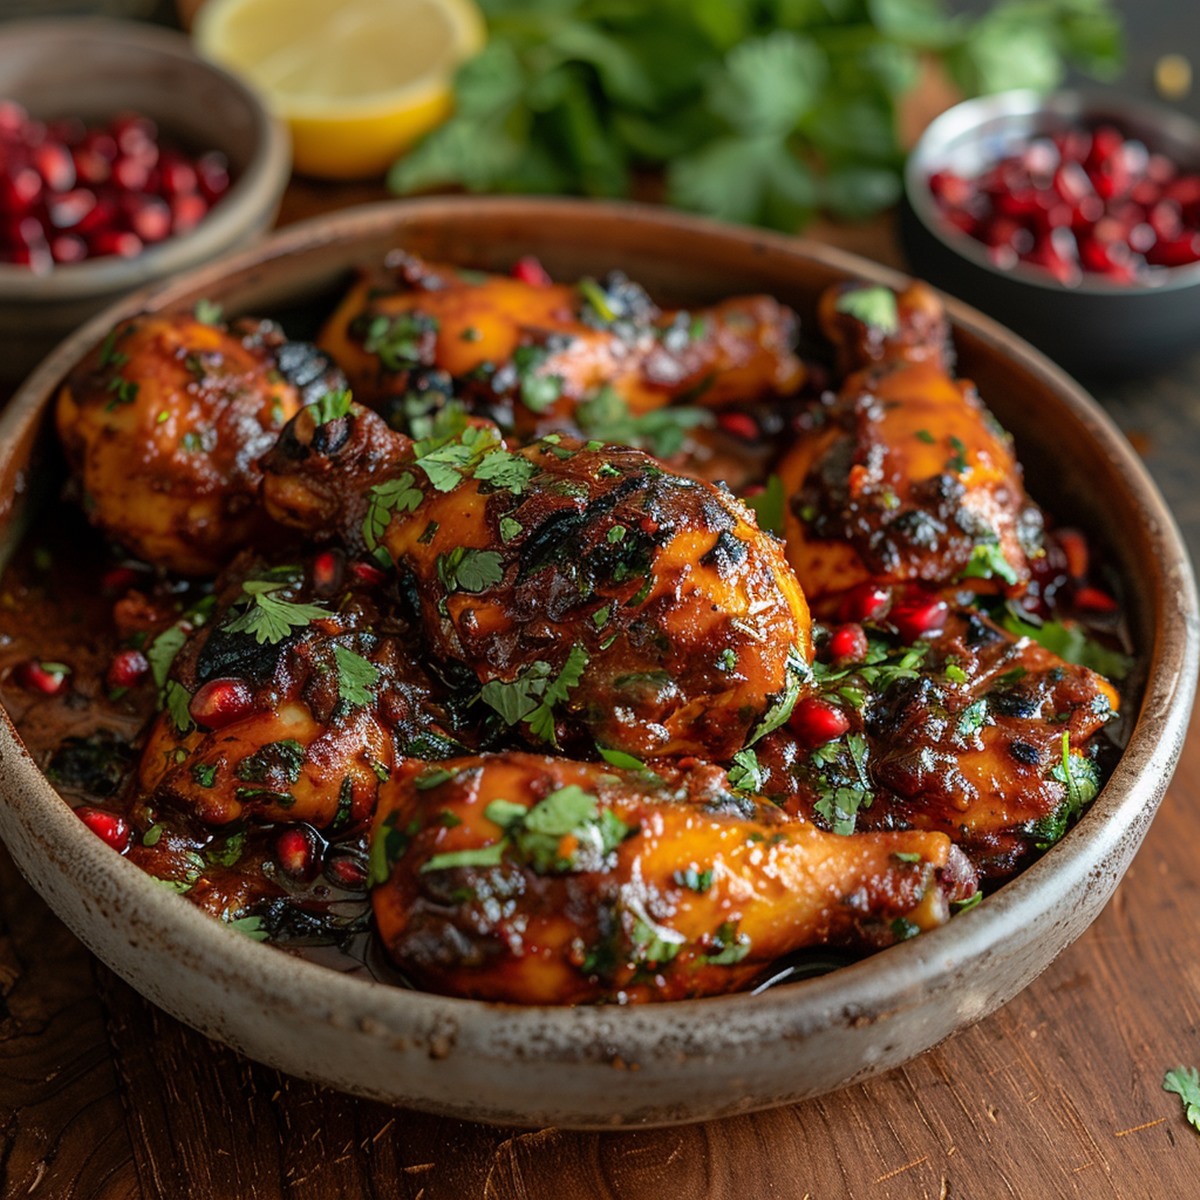 Tangy and flavorful Anardana Chicken garnished with fresh coriander leaves, served in a rustic bowl with lemon slices and dried pomegranate seeds on a wooden table.